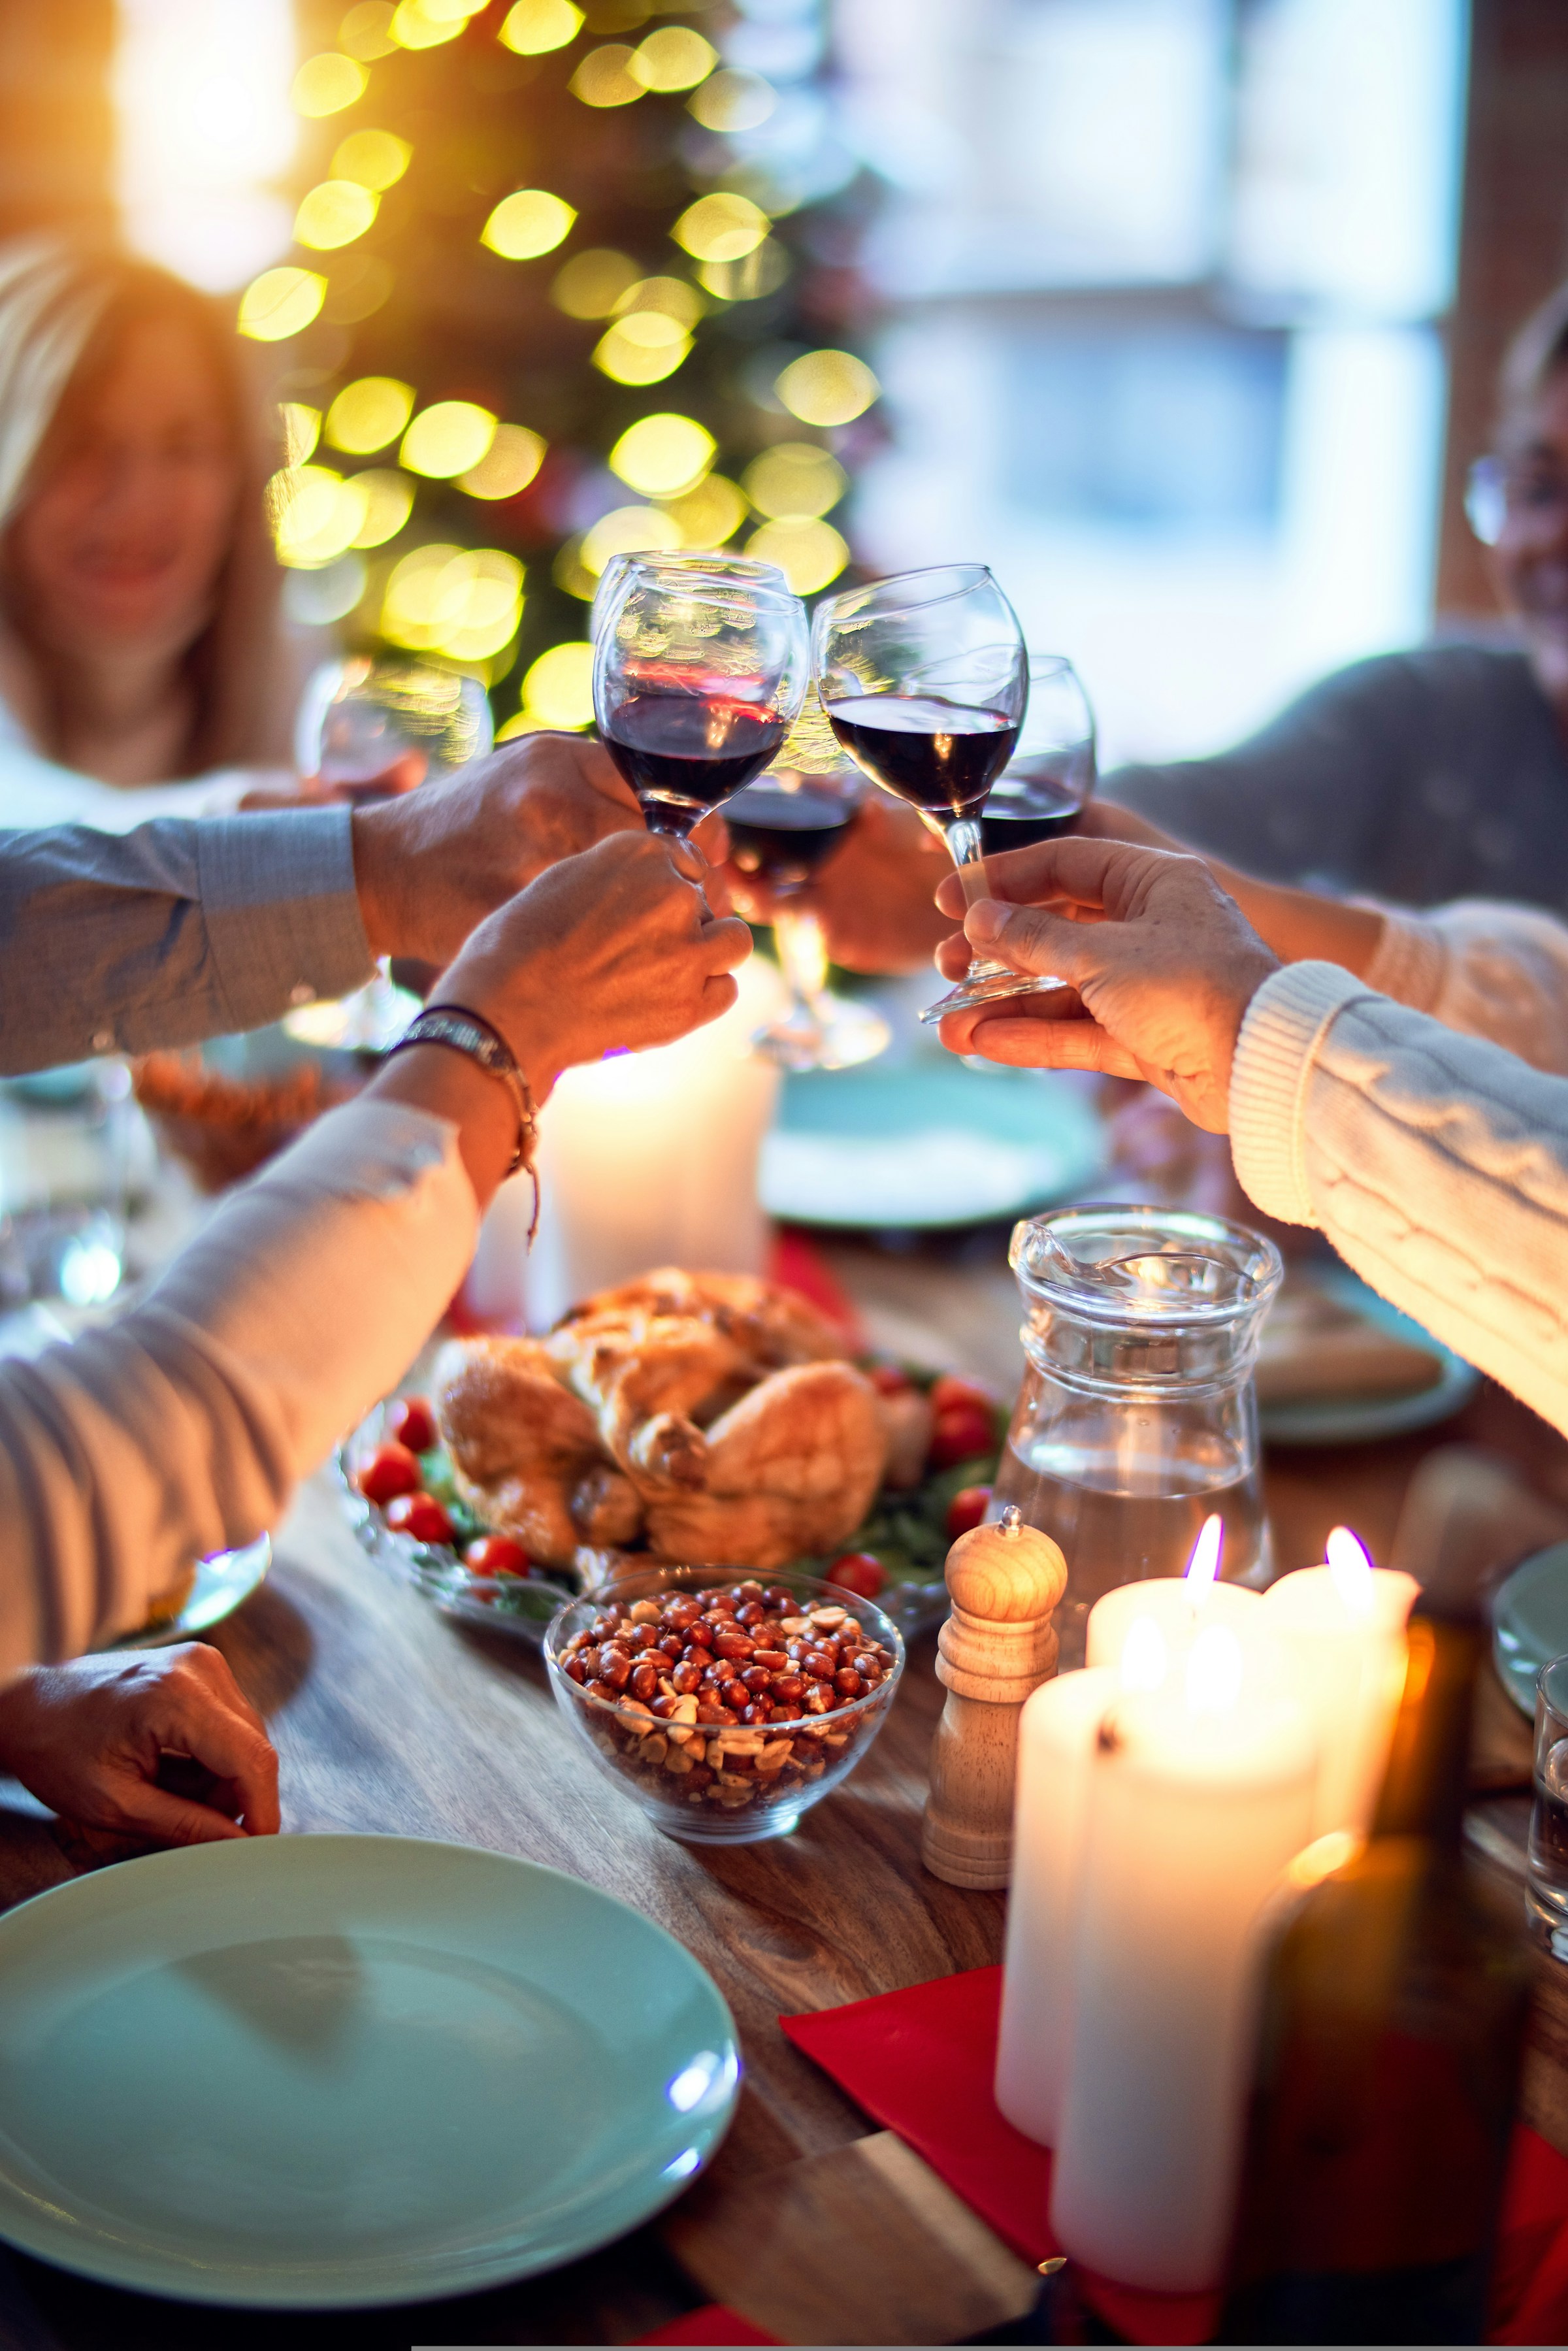 Family members toasting during dinner | Source: Unsplash